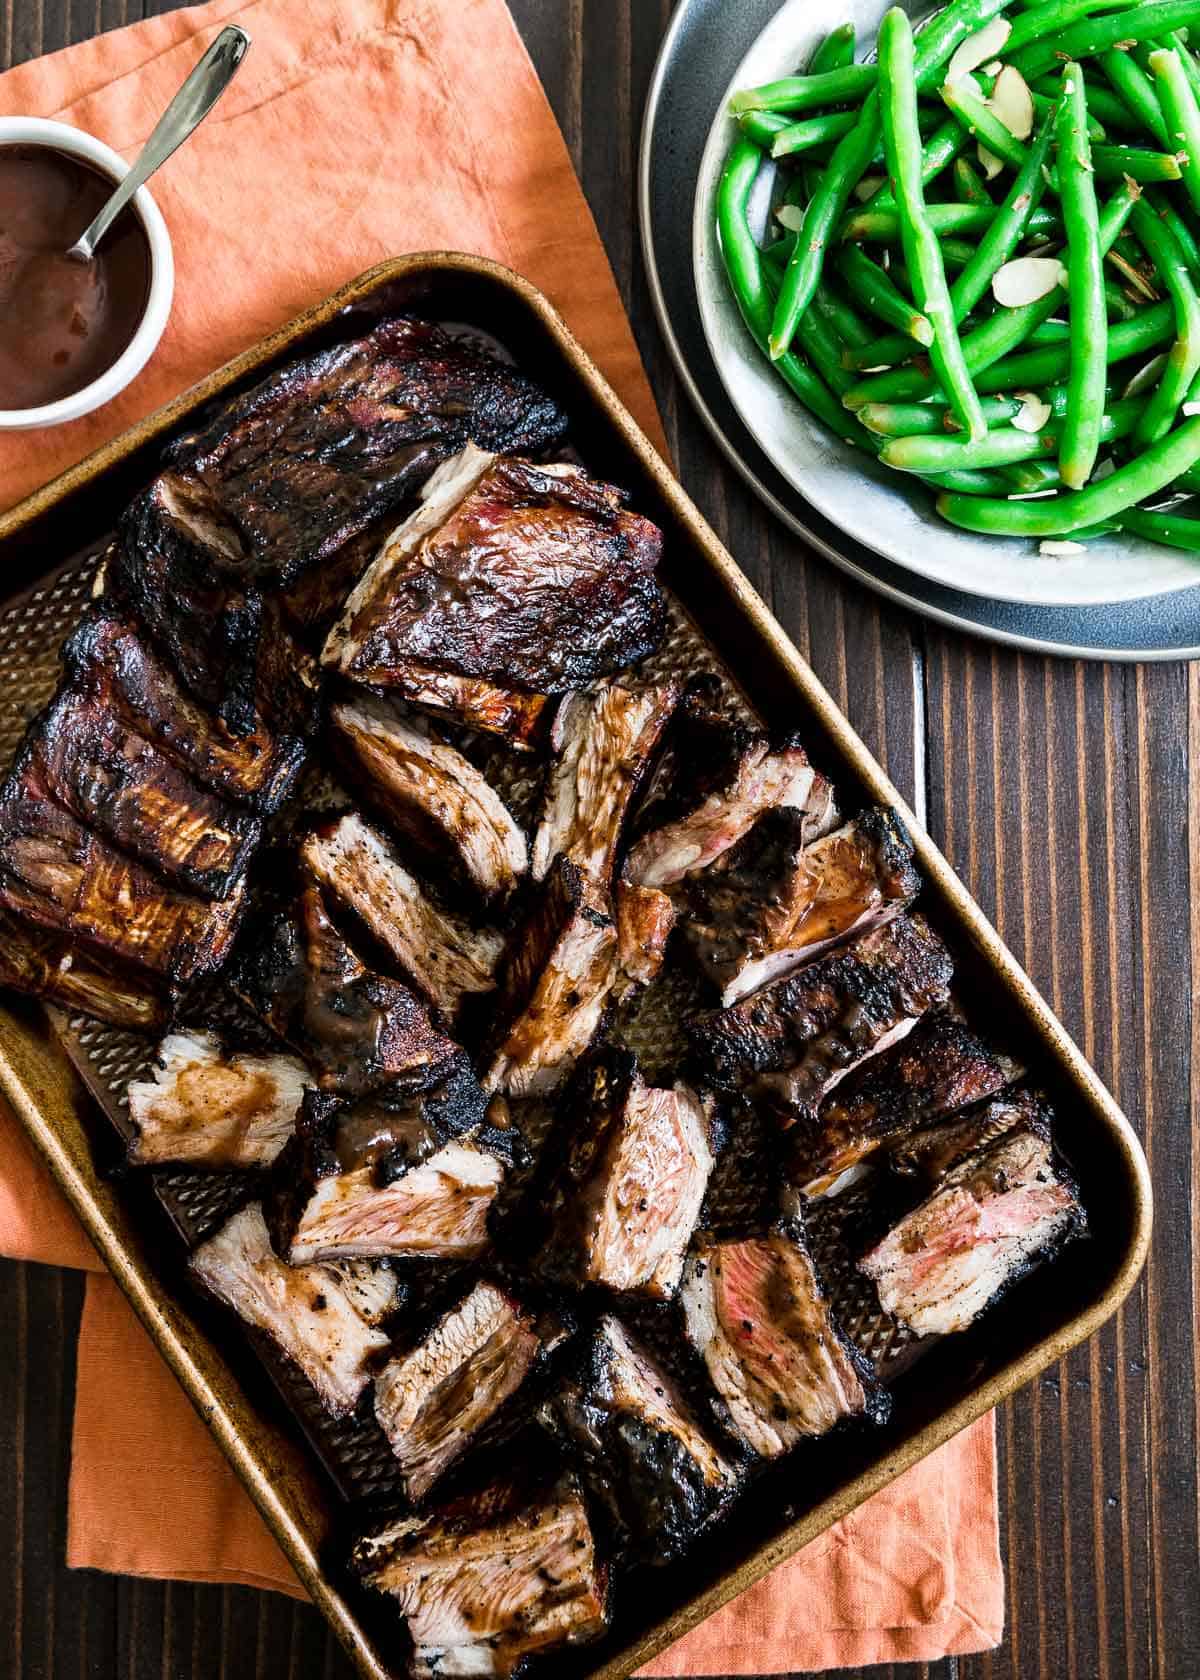 Learn how to cook lamb ribs on the grill with this easy BBQ lamb ribs recipe.